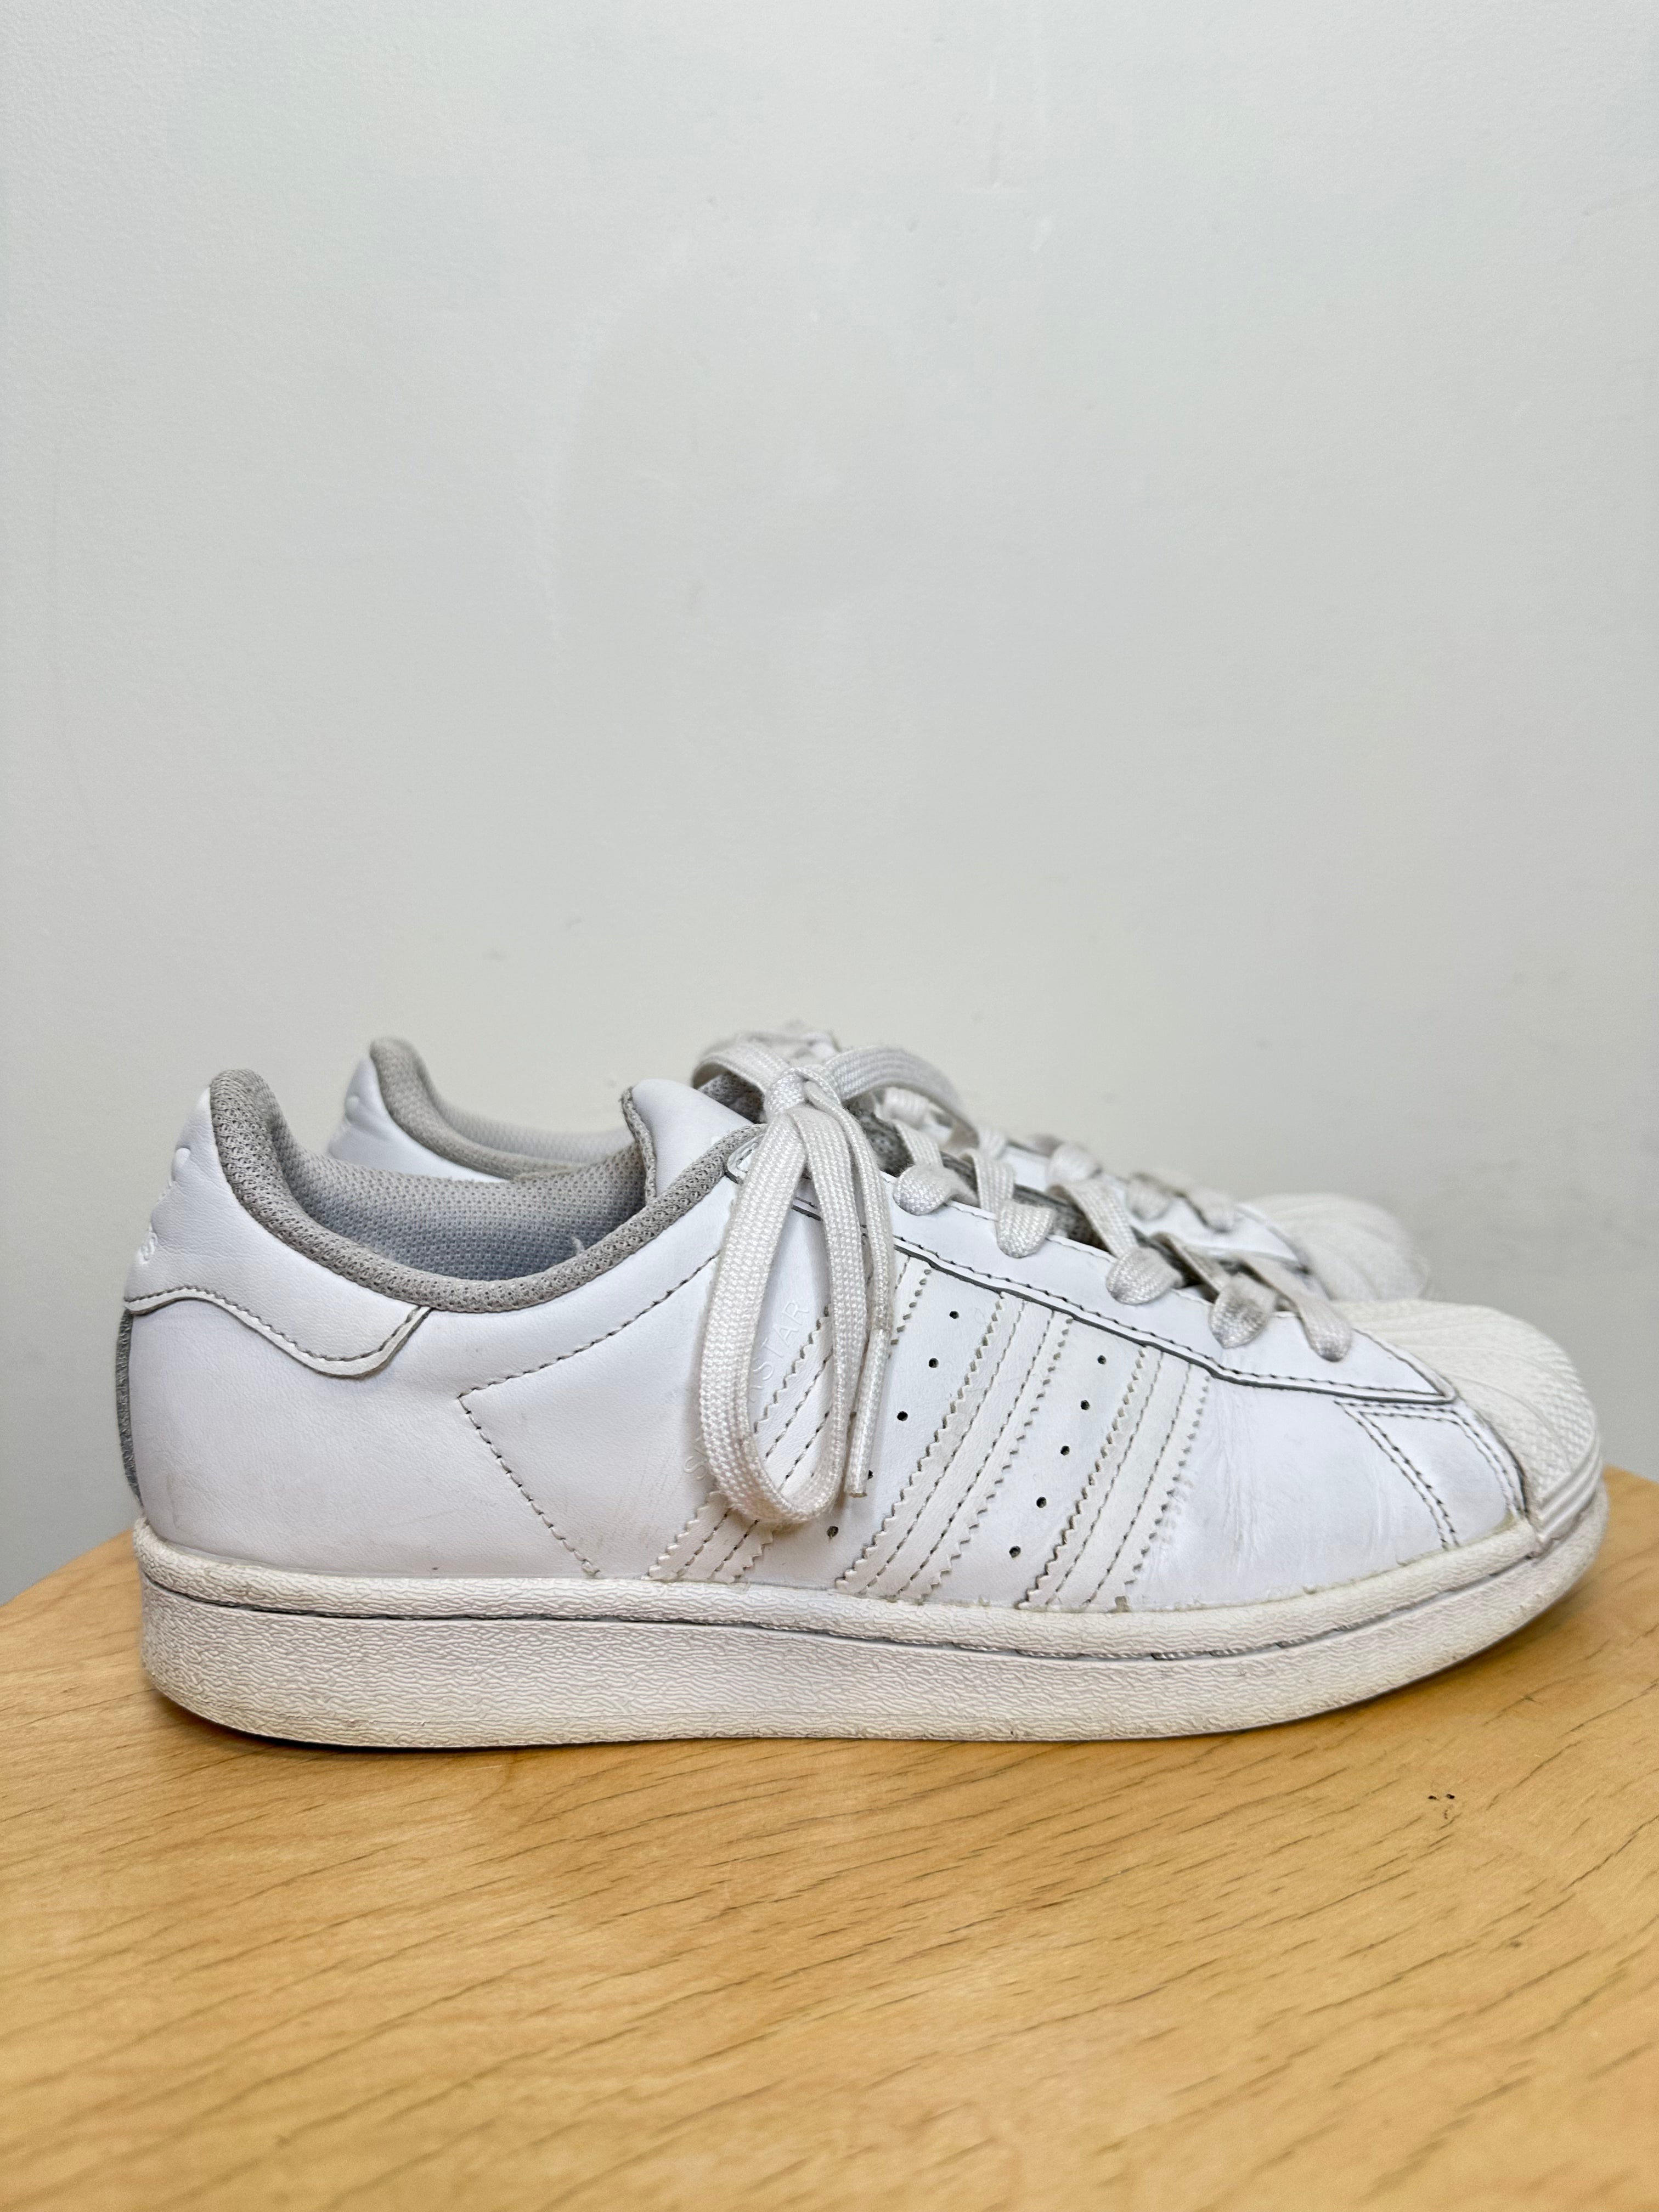 Adidas Superstar White Leather Shoes - W8.5/9